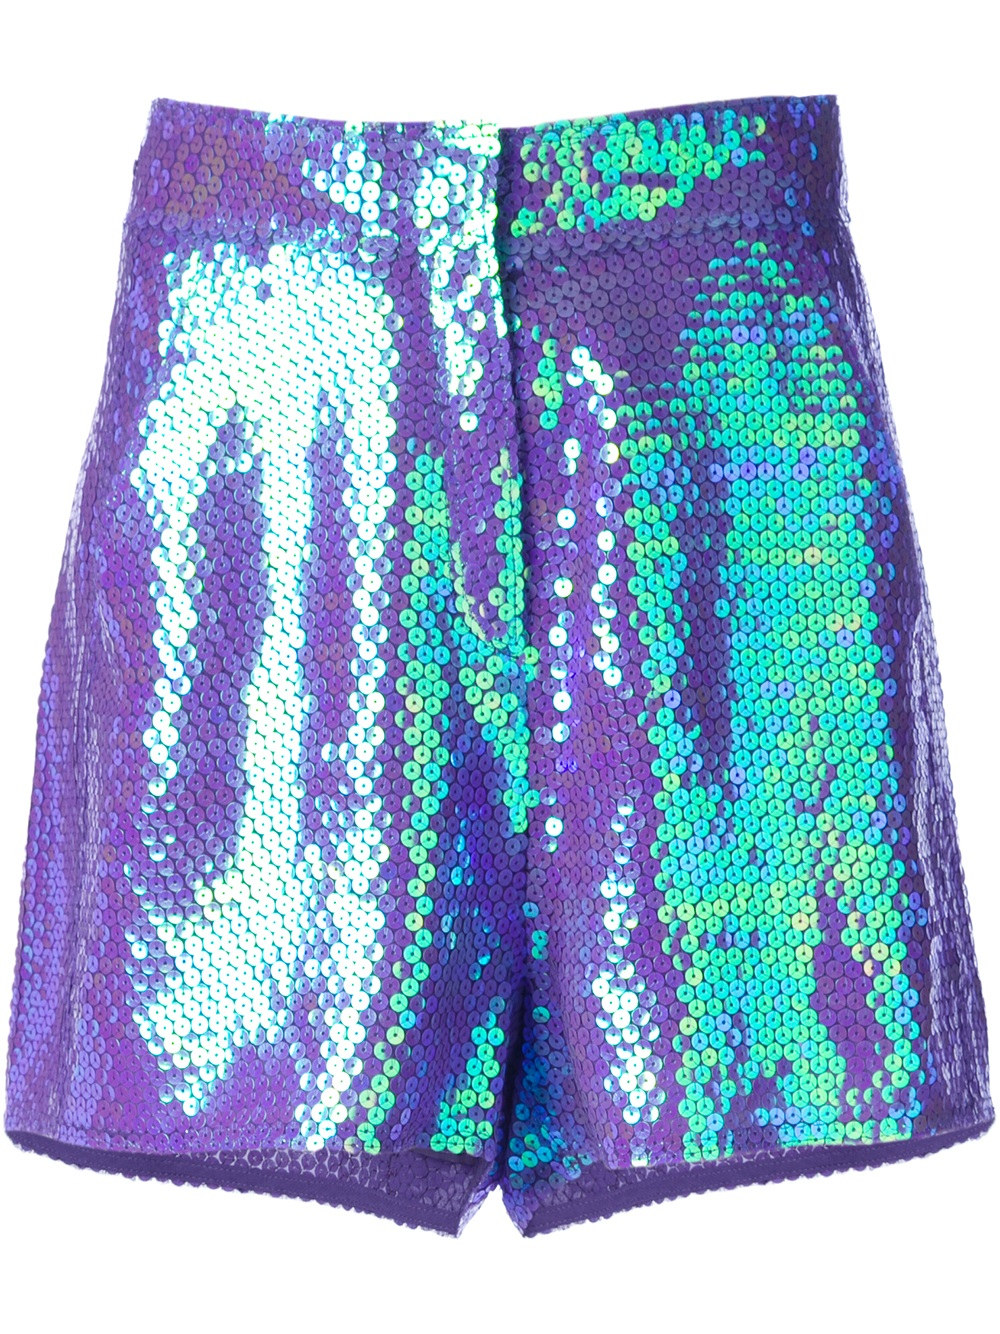 Lyst - Acne Studios Sequin Embellished Shorts in Purple